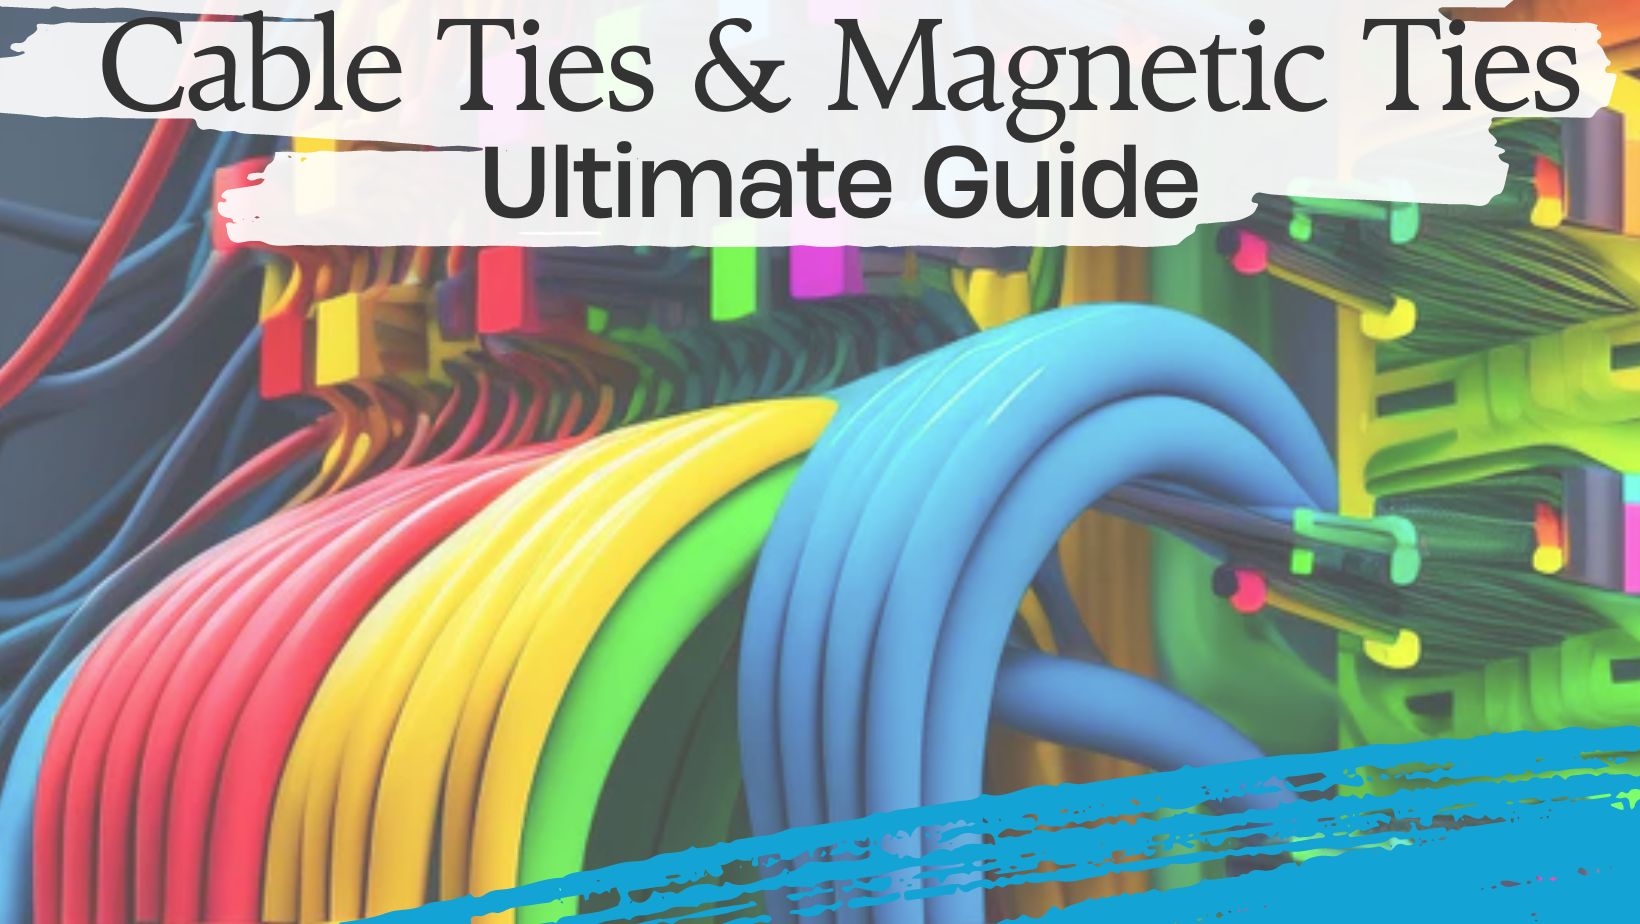 A Comprehensive Guide to Cable Ties and Magnetic Silicone Ties